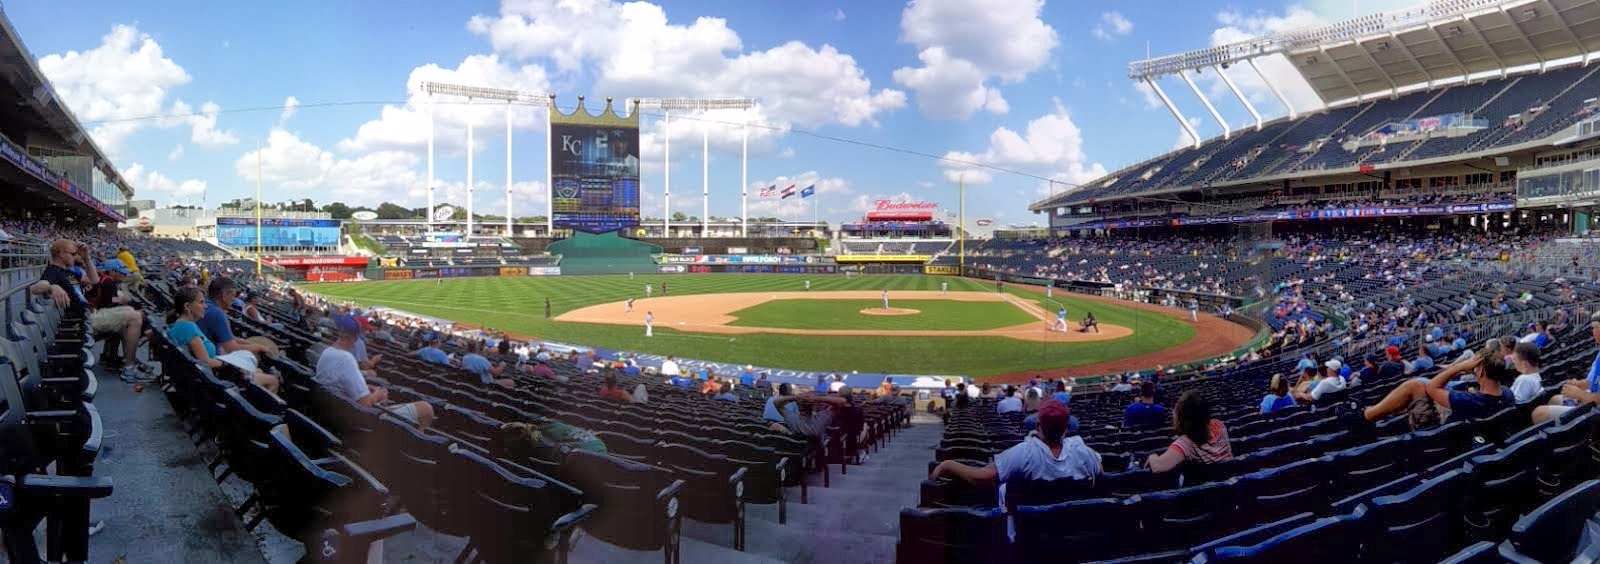 A Day at the K